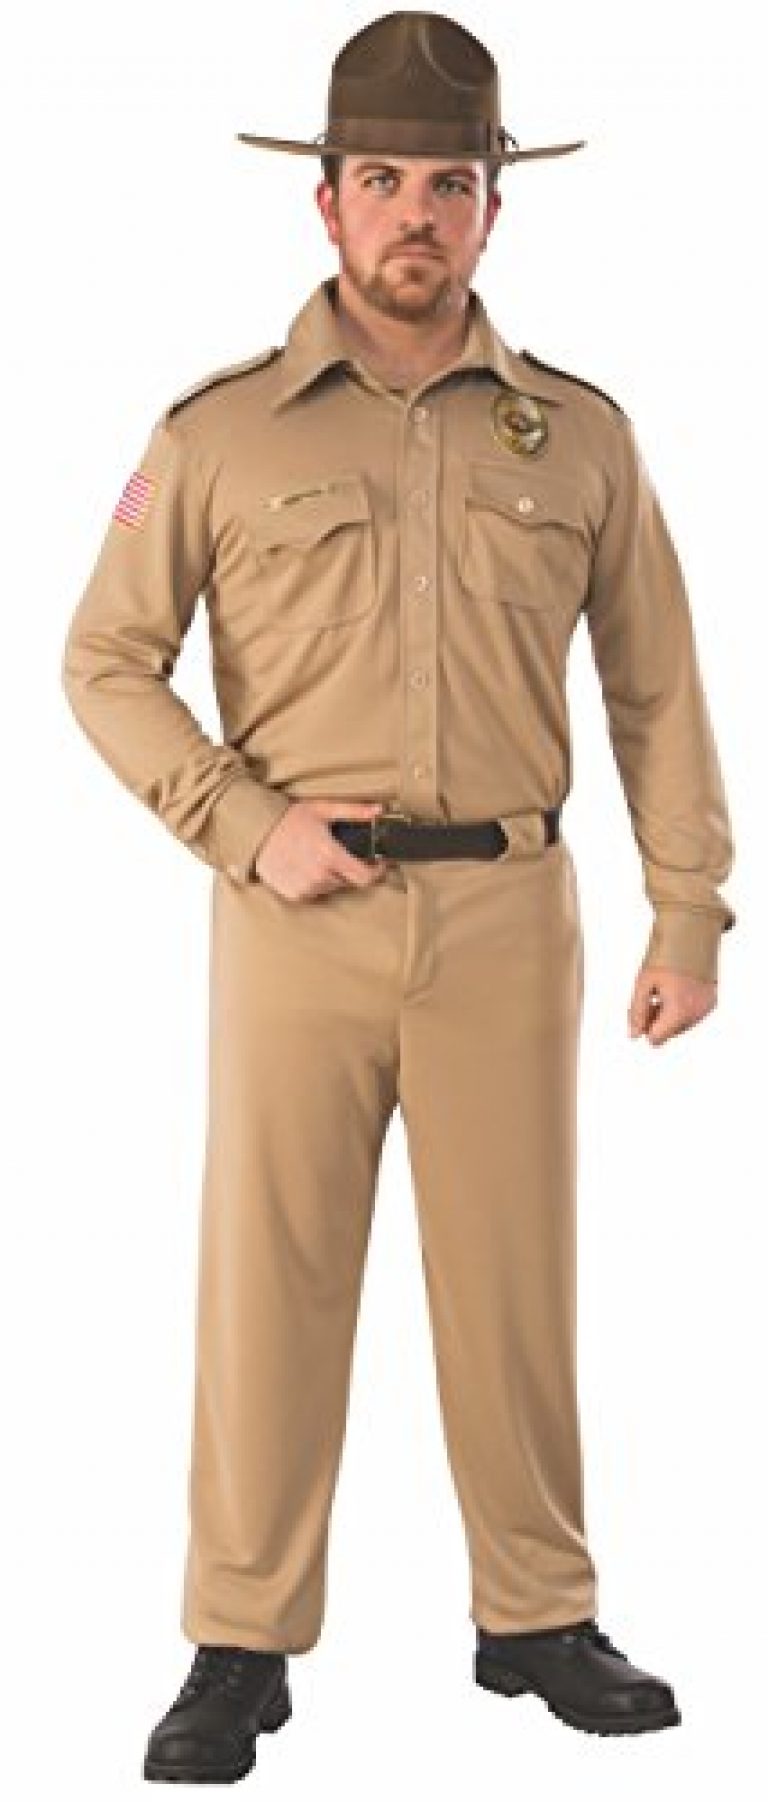 Rubie's Men's Stranger Things Jim Hopper Adult Sized Costumes, Multi Colored, Extra-Large US 1